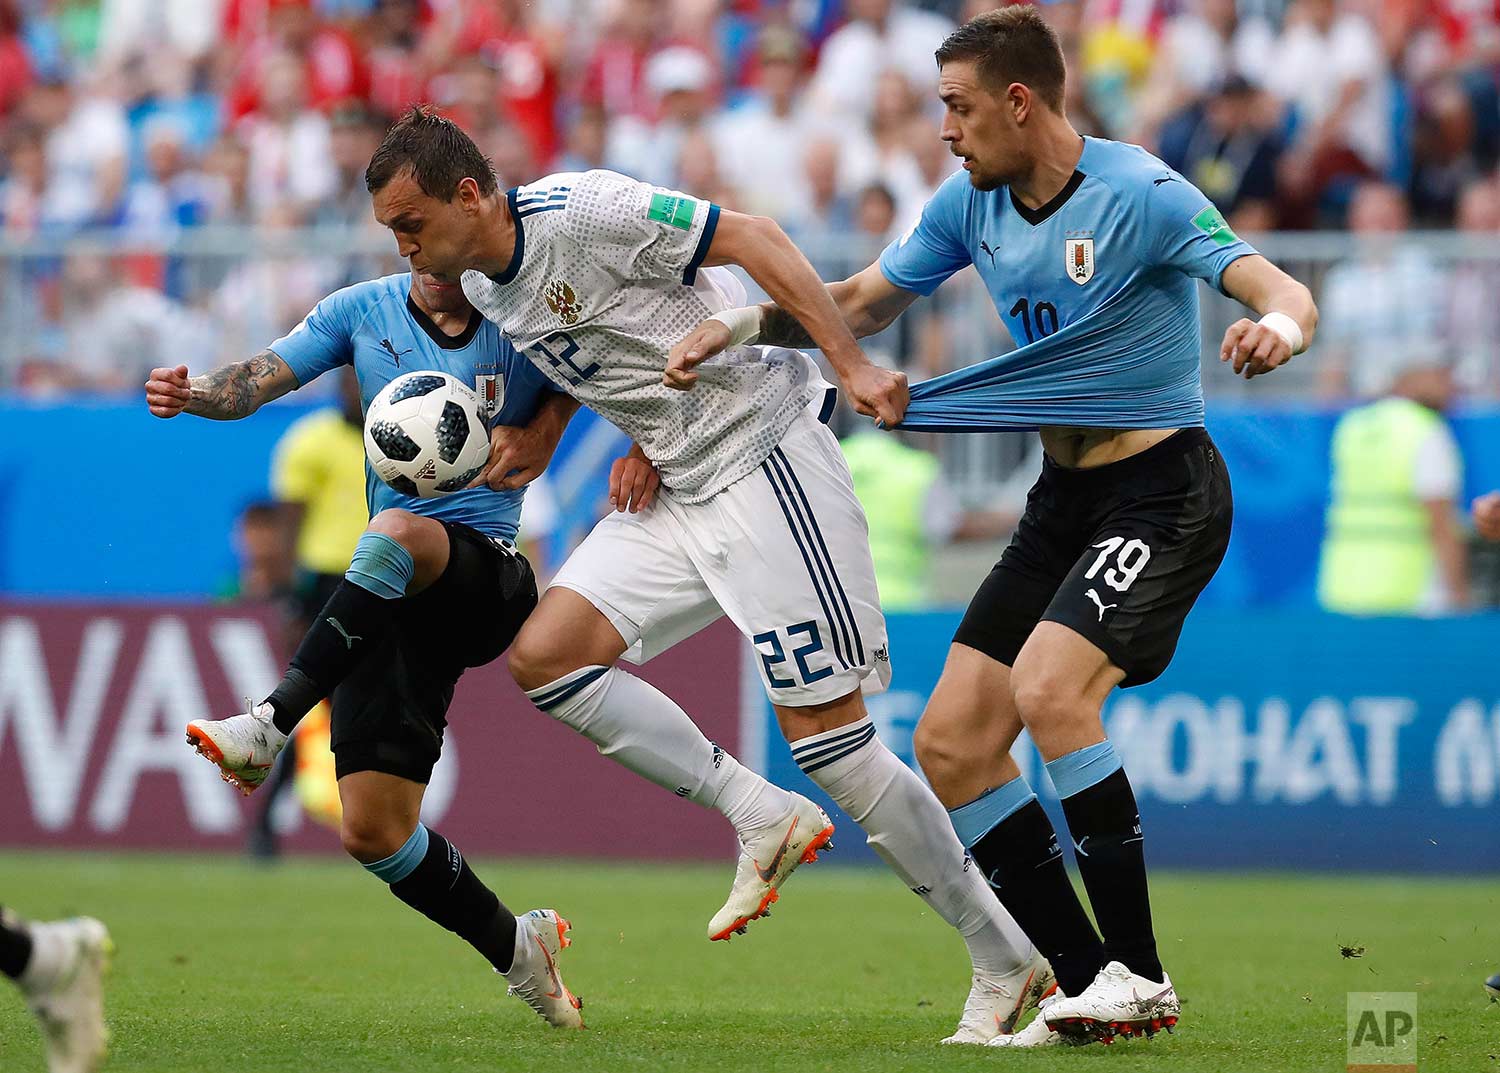  Uruguay's Lucas Torreira, from left, Russia's Artyom Dzyuba and Uruguay's Sebastian Coates challenge for the ball during the group A match between Uruguay and Russia at the 2018 soccer World Cup at the Samara Arena in Samara, Russia, Monday, June 25